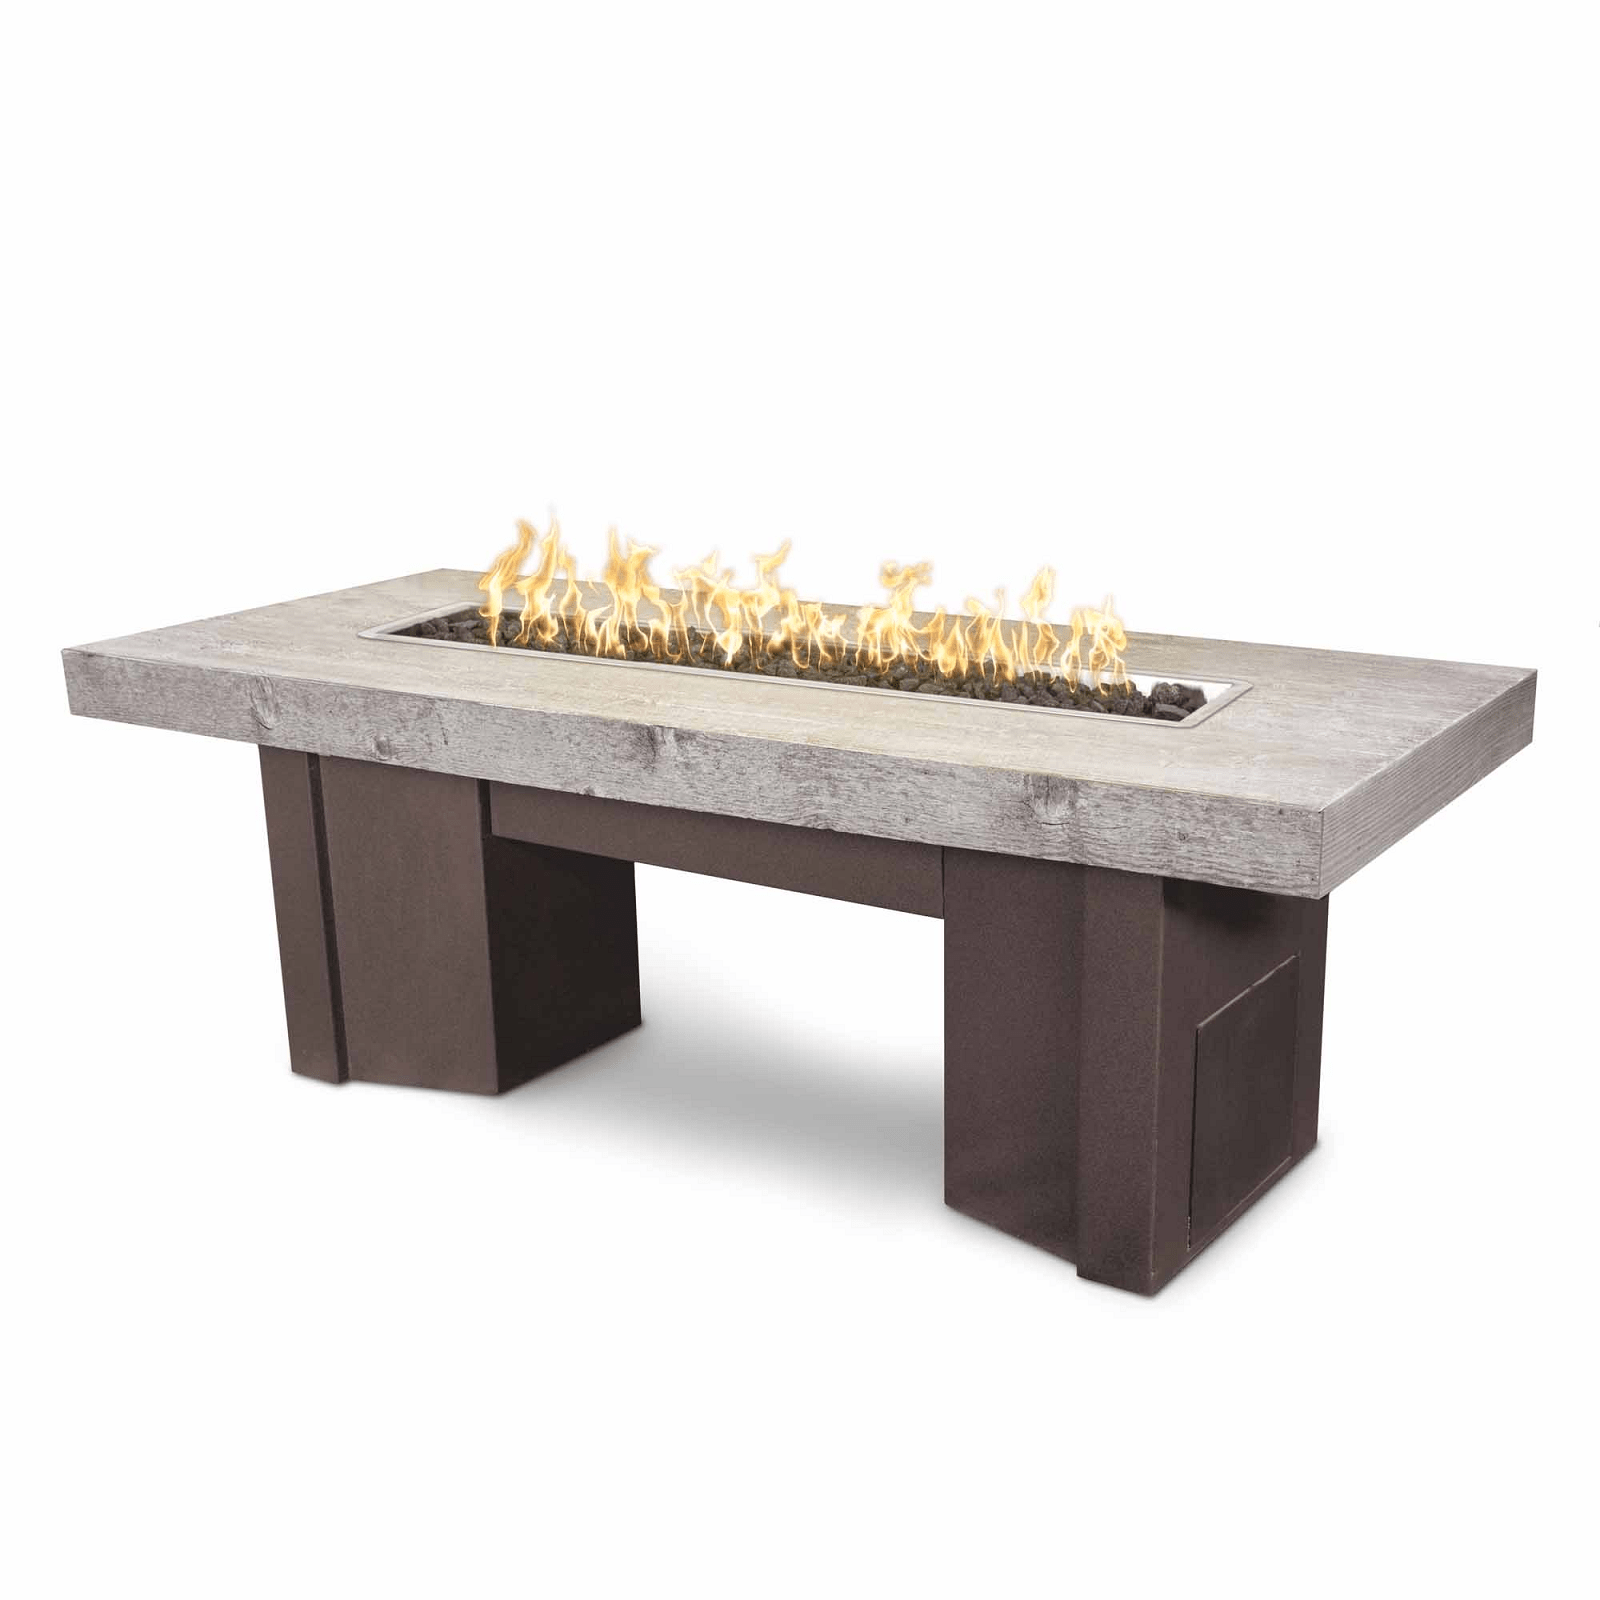 The Outdoor Plus Fire Features The Outdoor Plus 60" Alameda Fire Table Wood Grain - Flame Sense System with Push Button Spark Igniter / OPT-ALMWG60FSEN